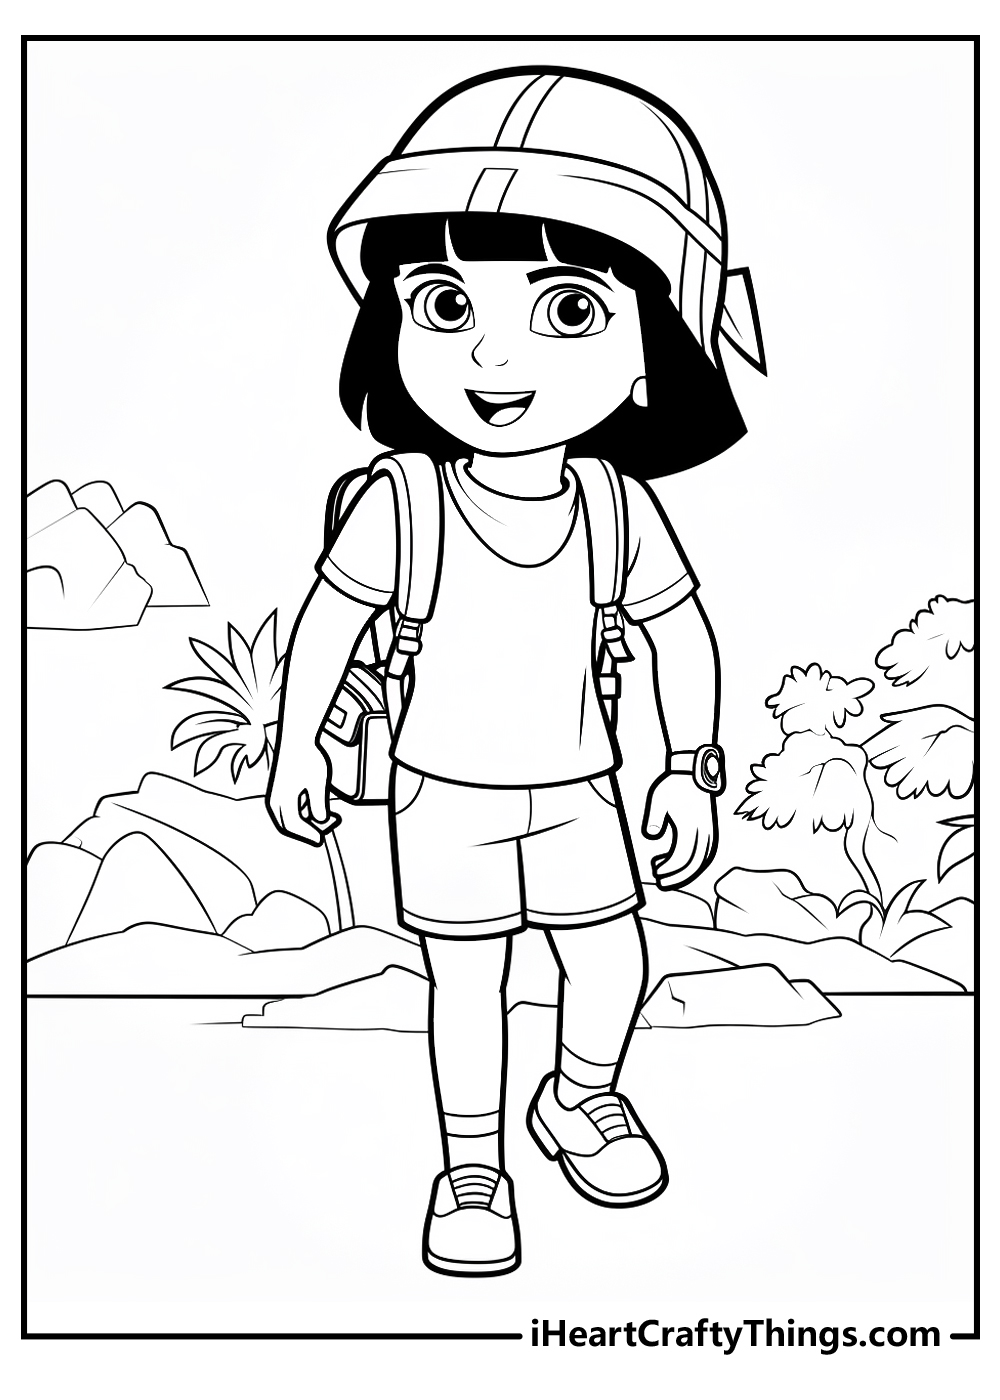 dora coloring pages free download